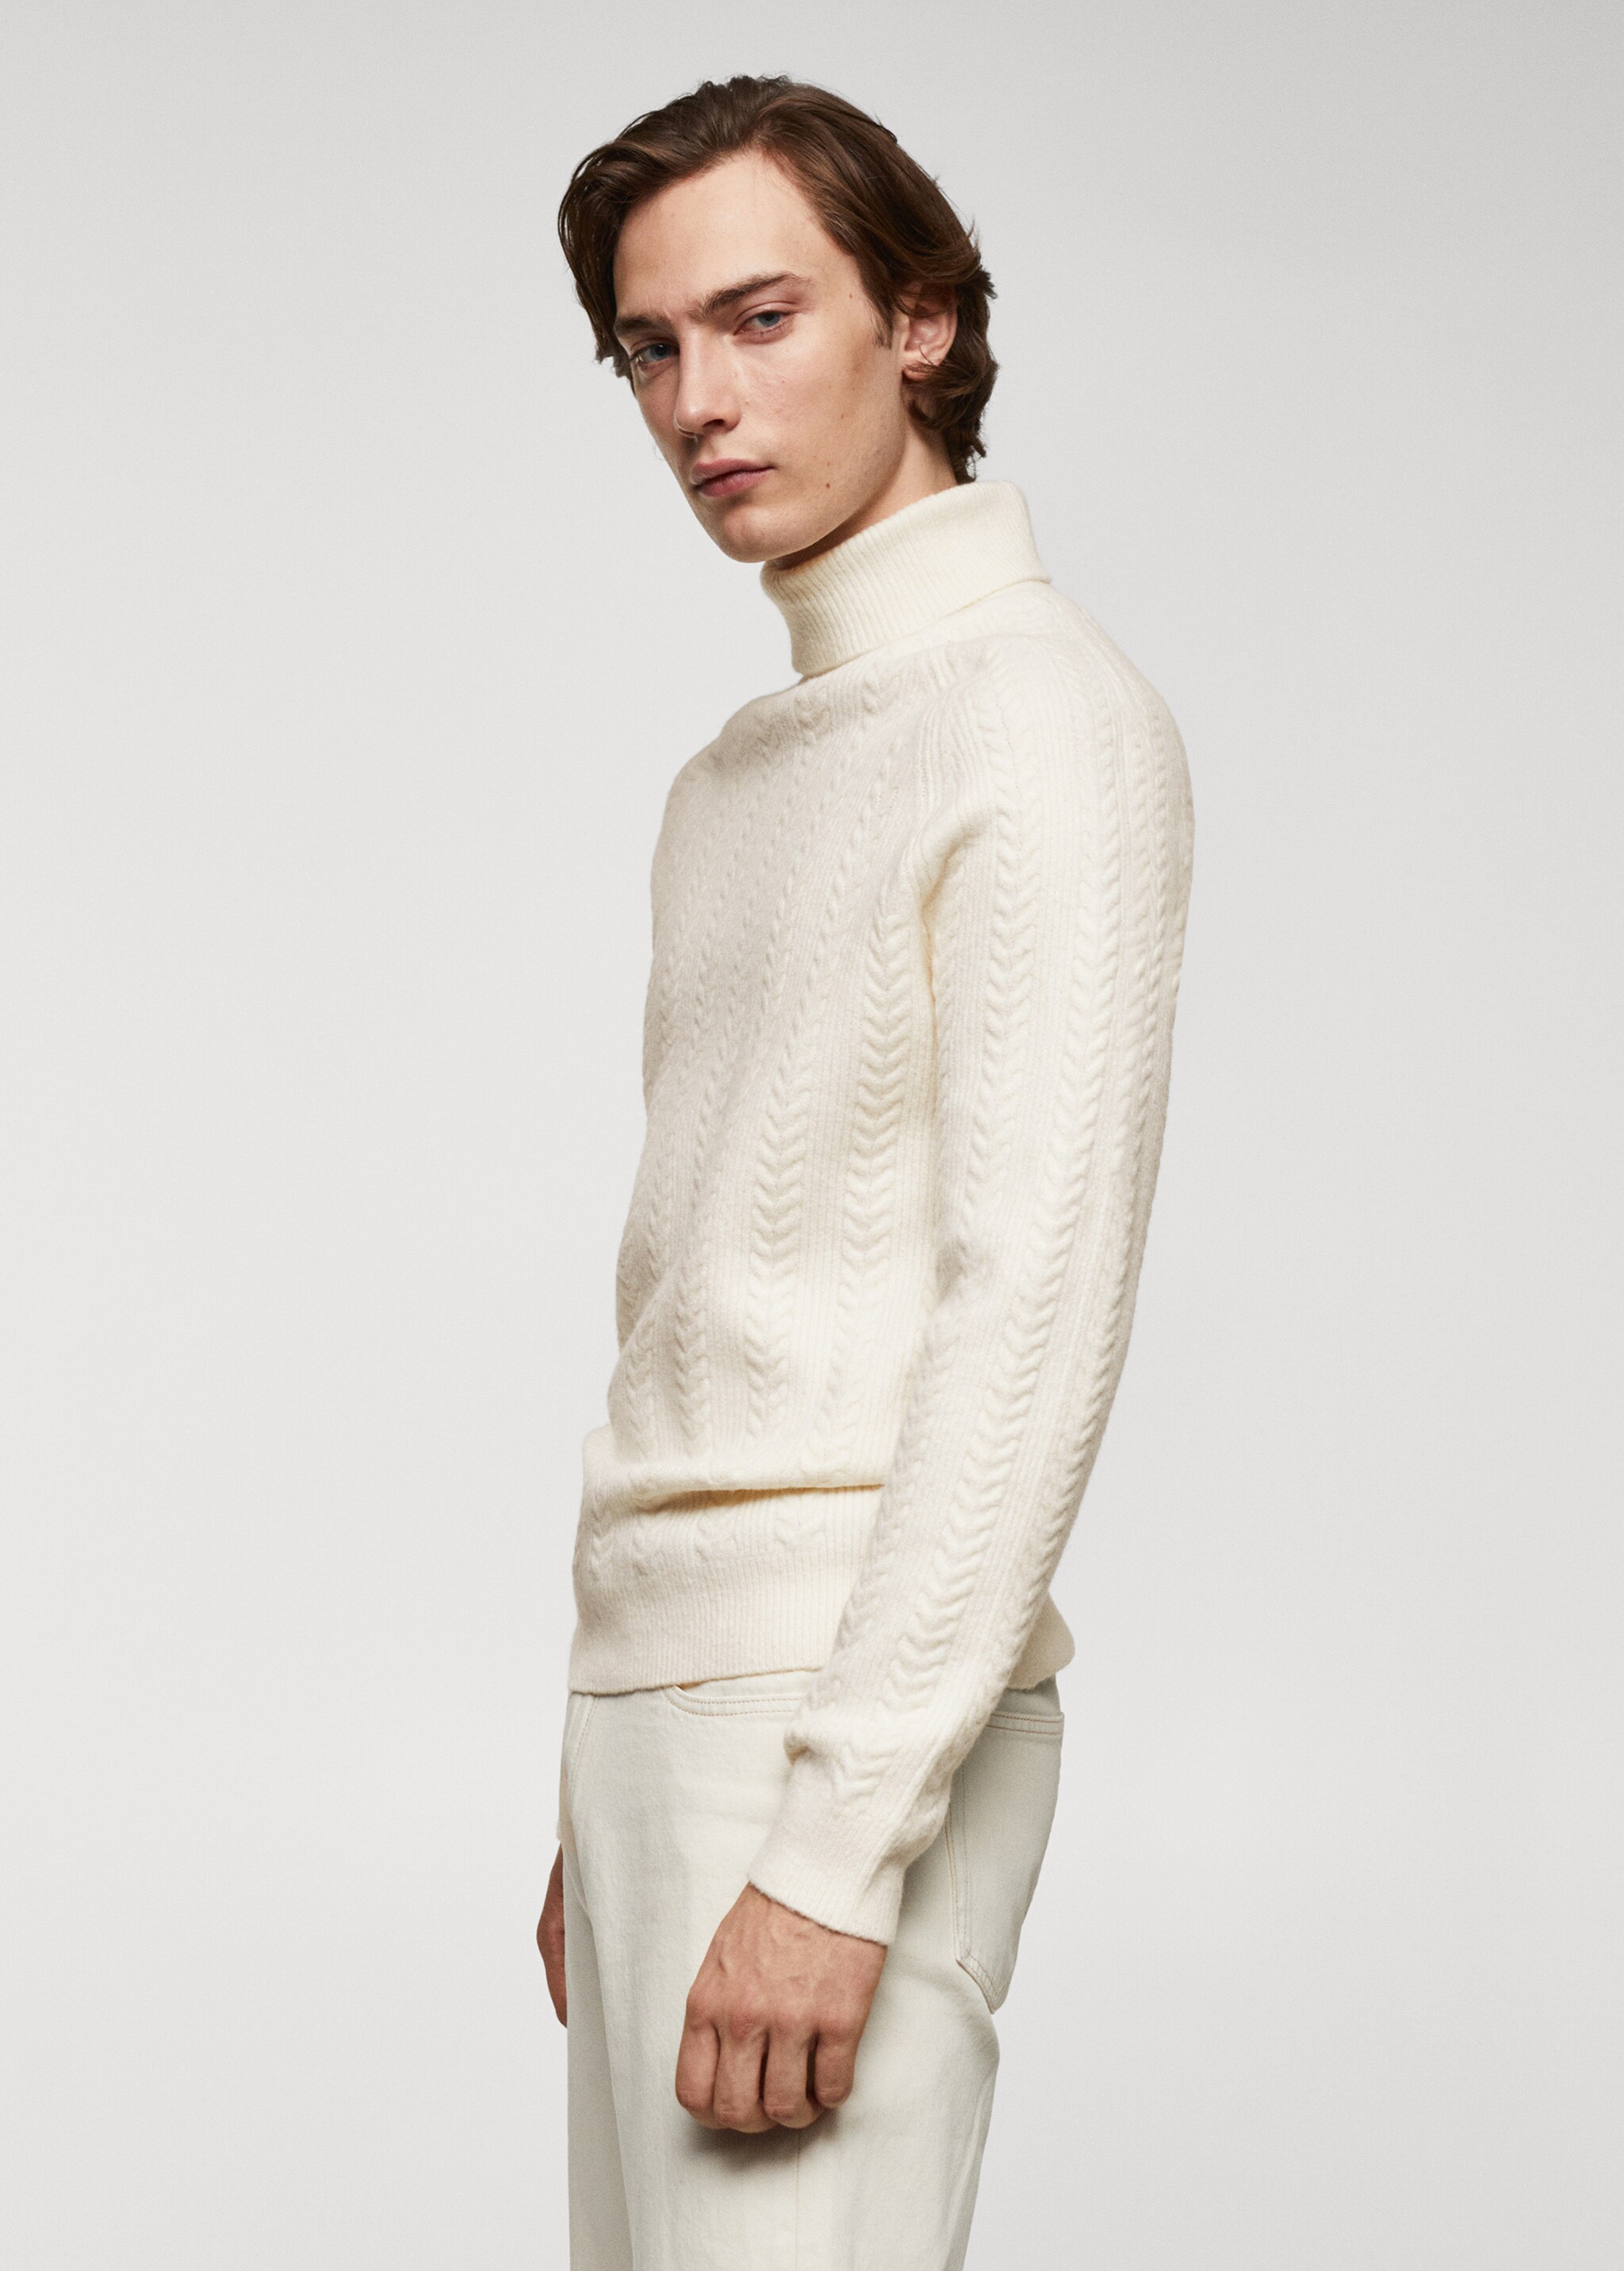 Twisted turtleneck sweater - Details of the article 2